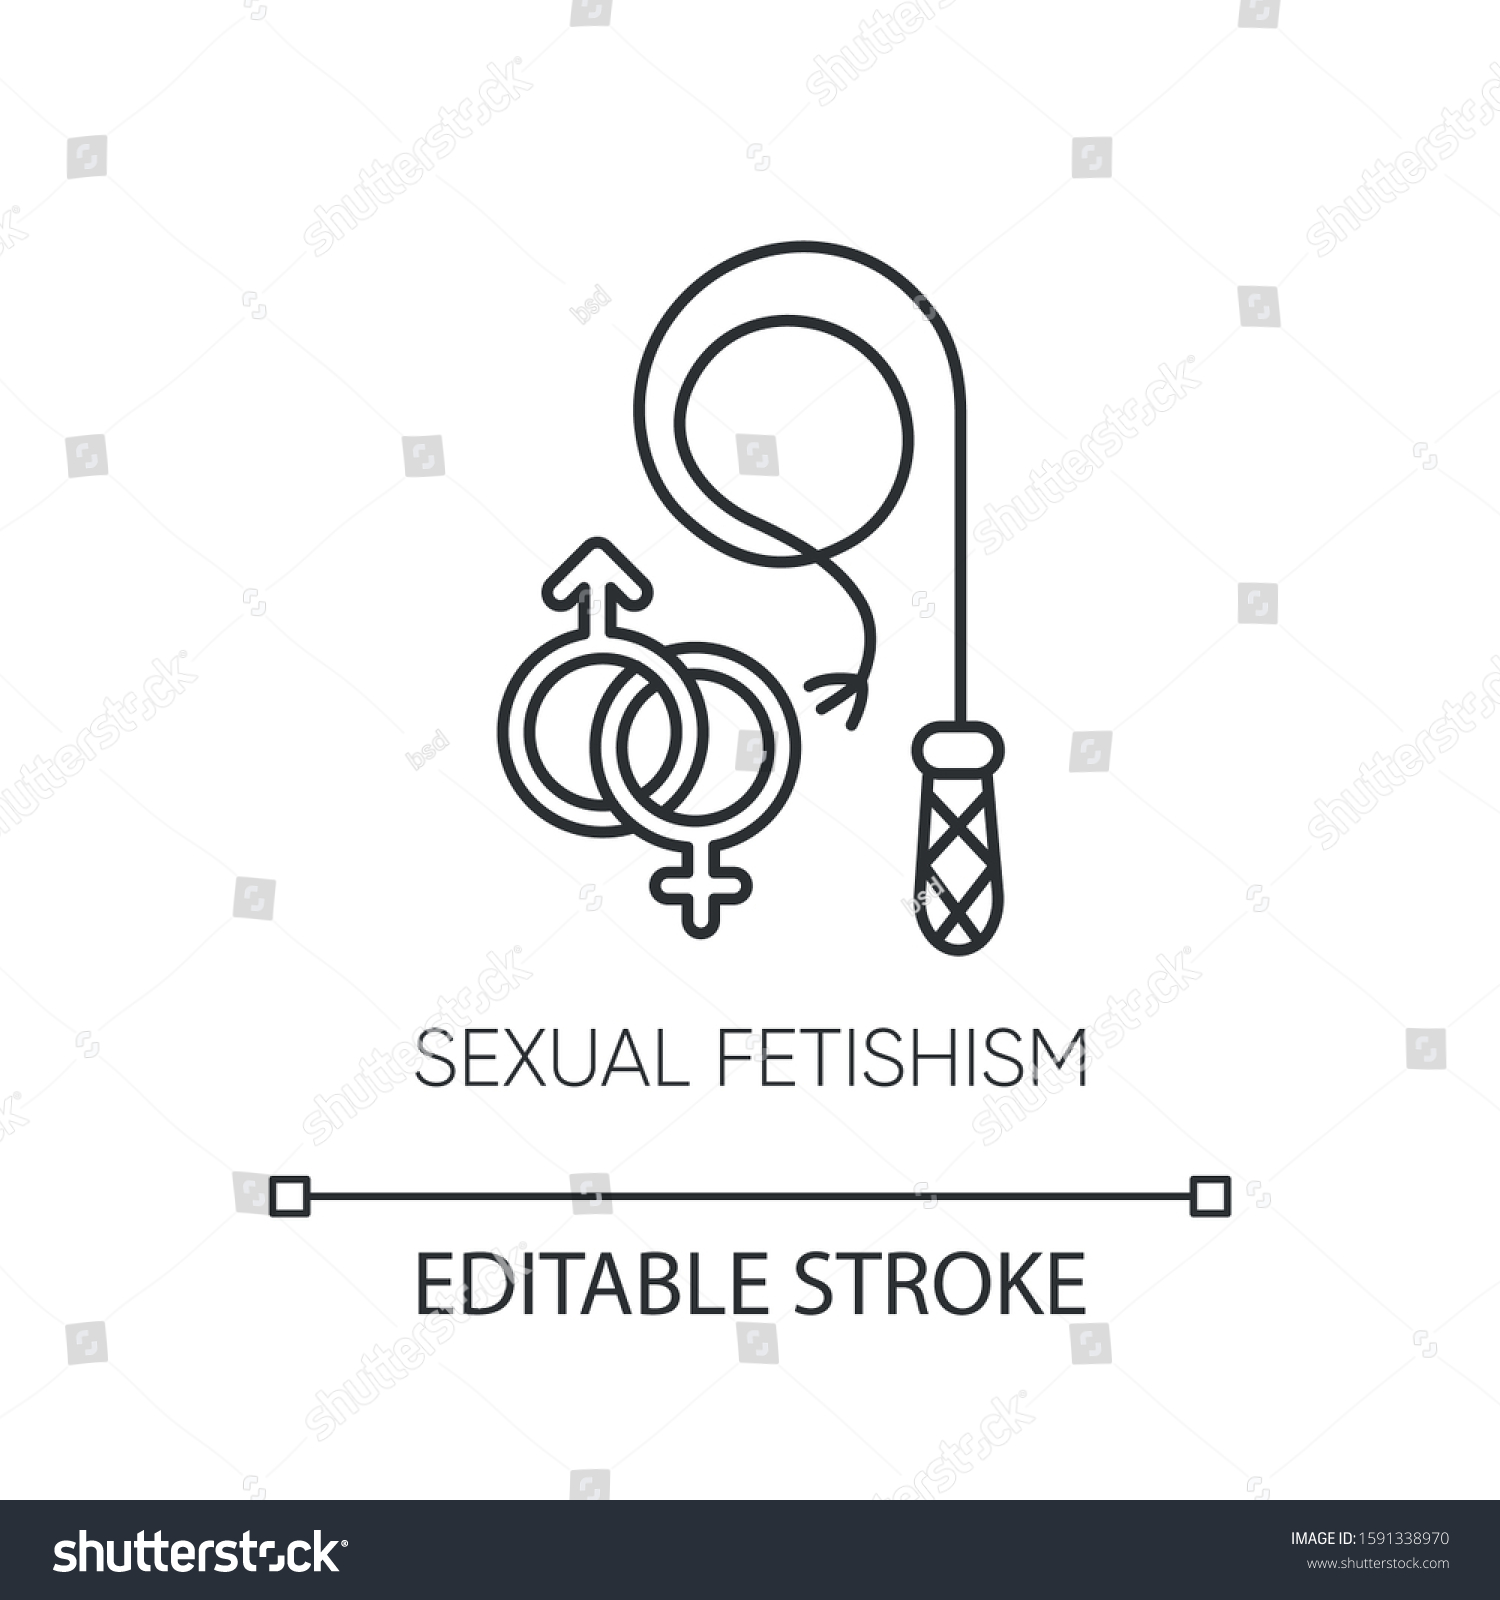 Sexual Fetishism Linear Icon Erotic Play Stock Vector Royalty Free 1591338970 Shutterstock 6727